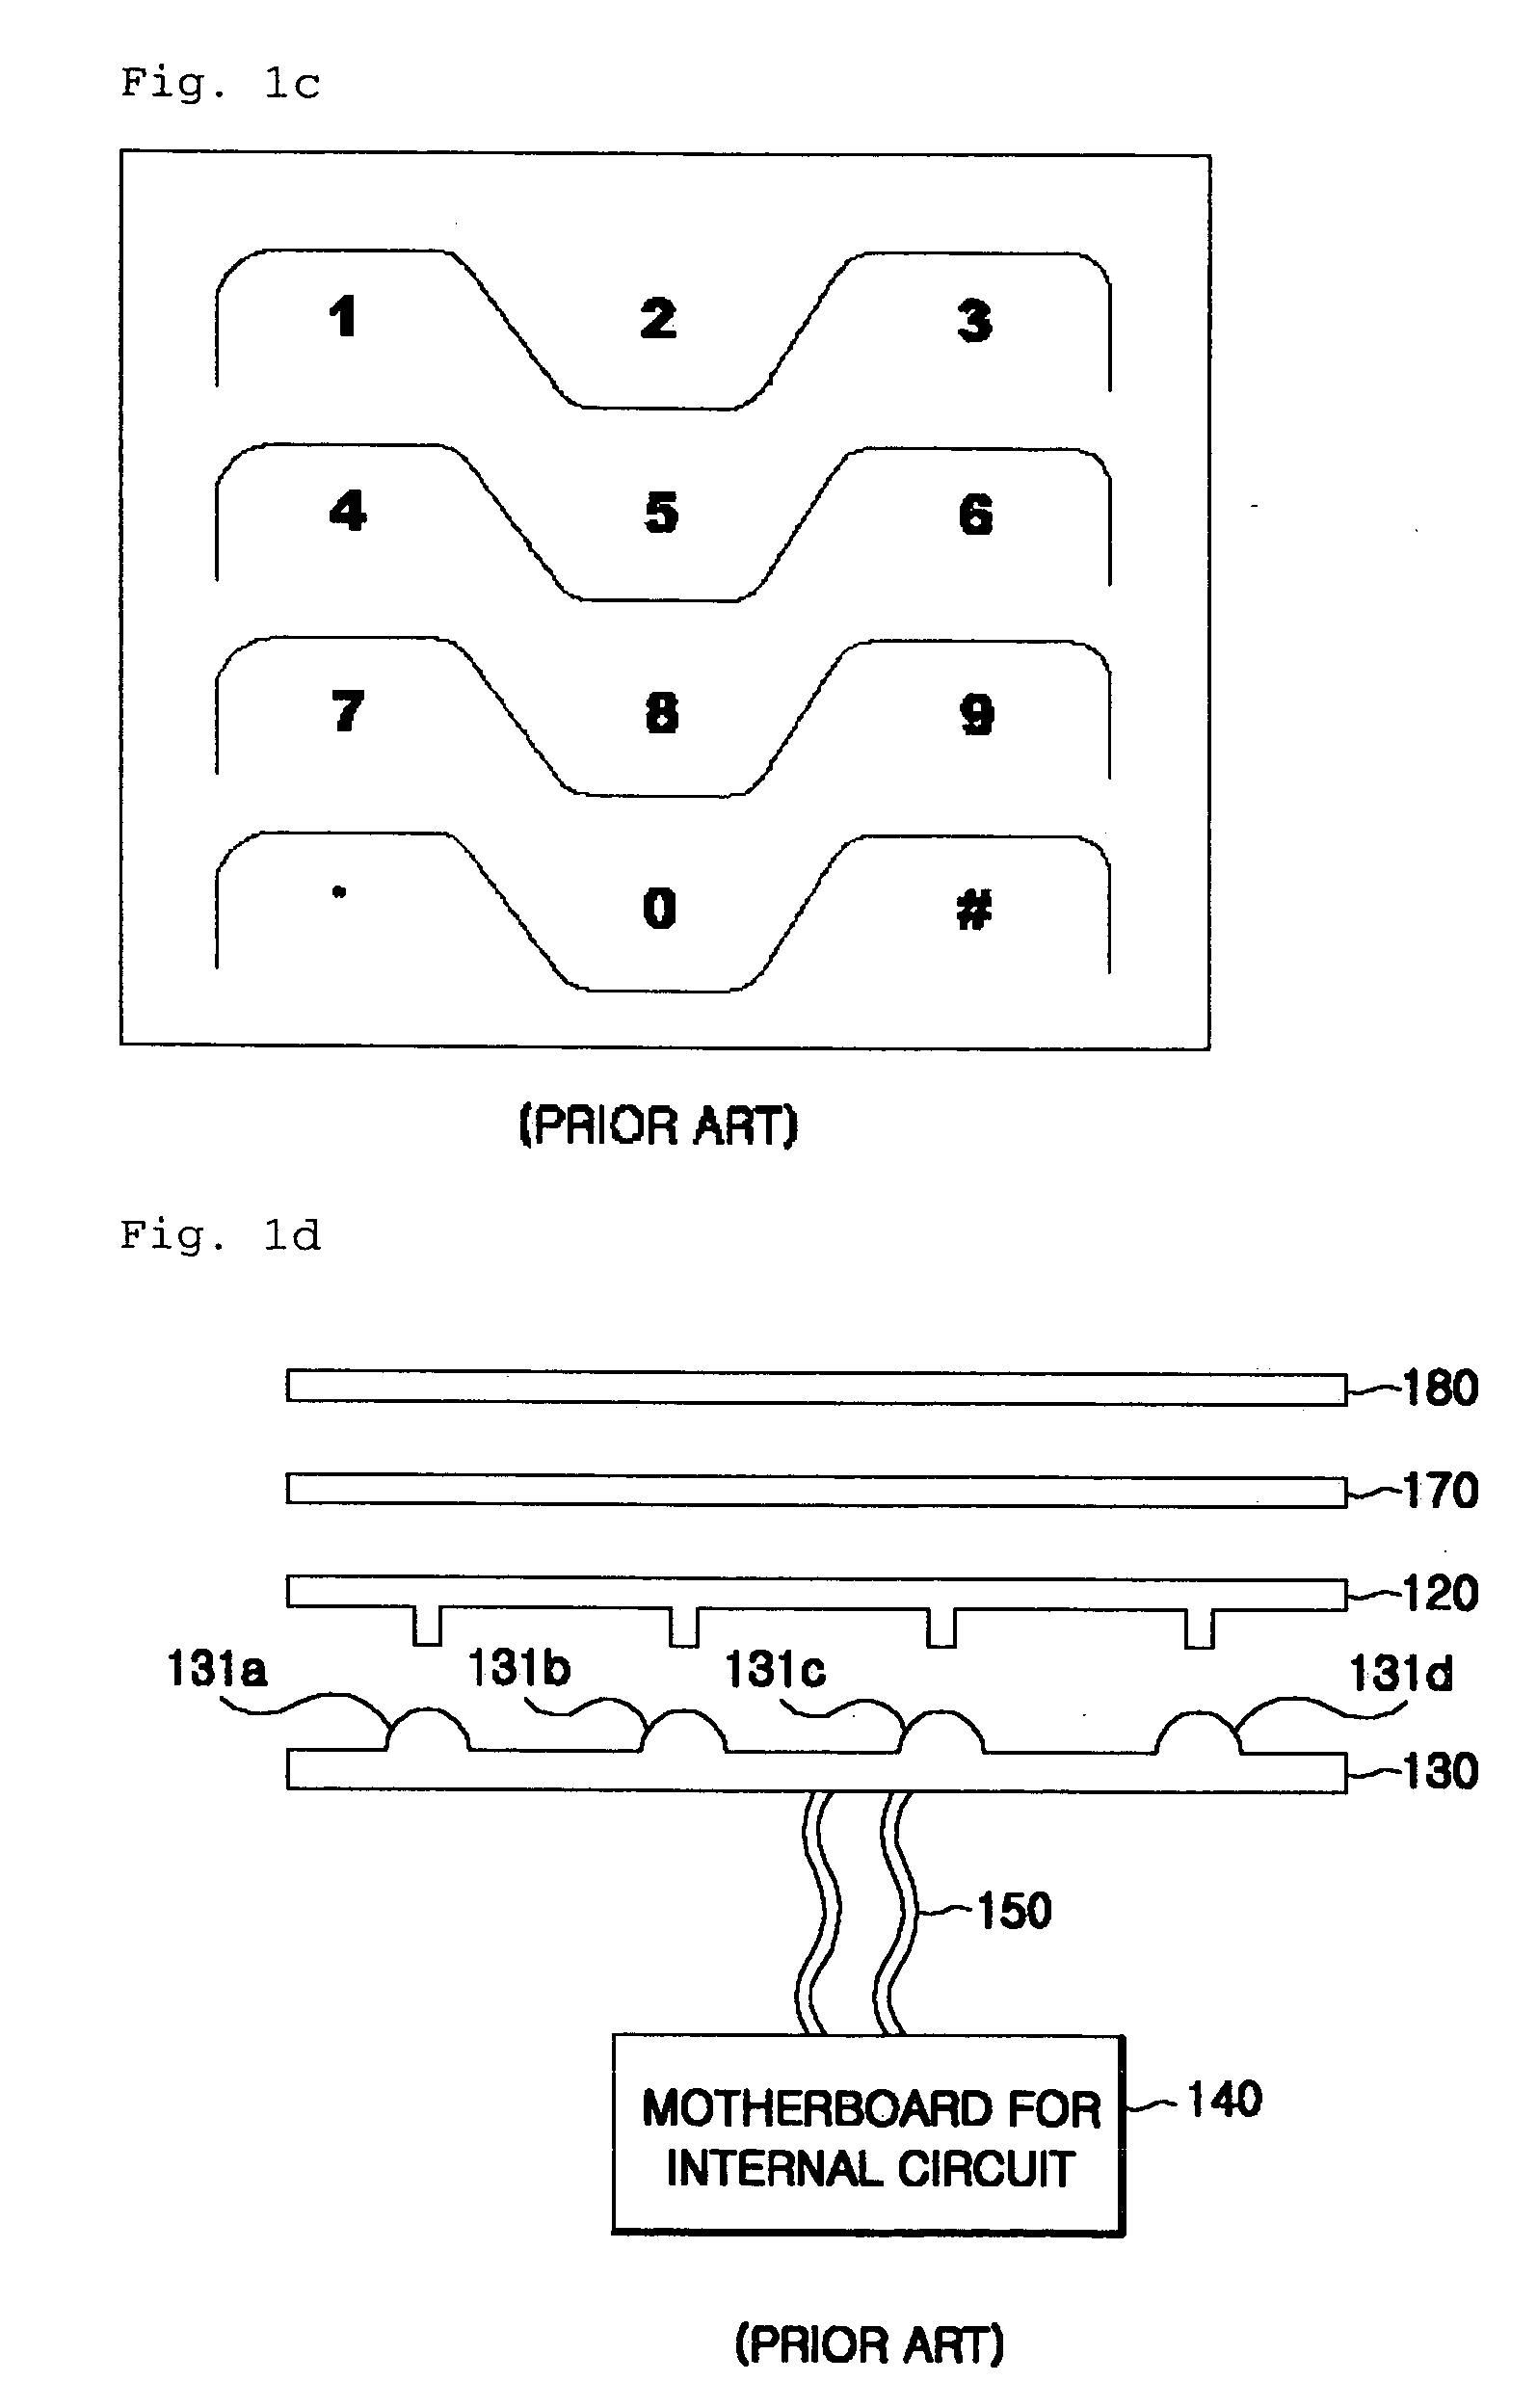 Keypad for enhancing input resolution and method for enhancing input resolution using the same